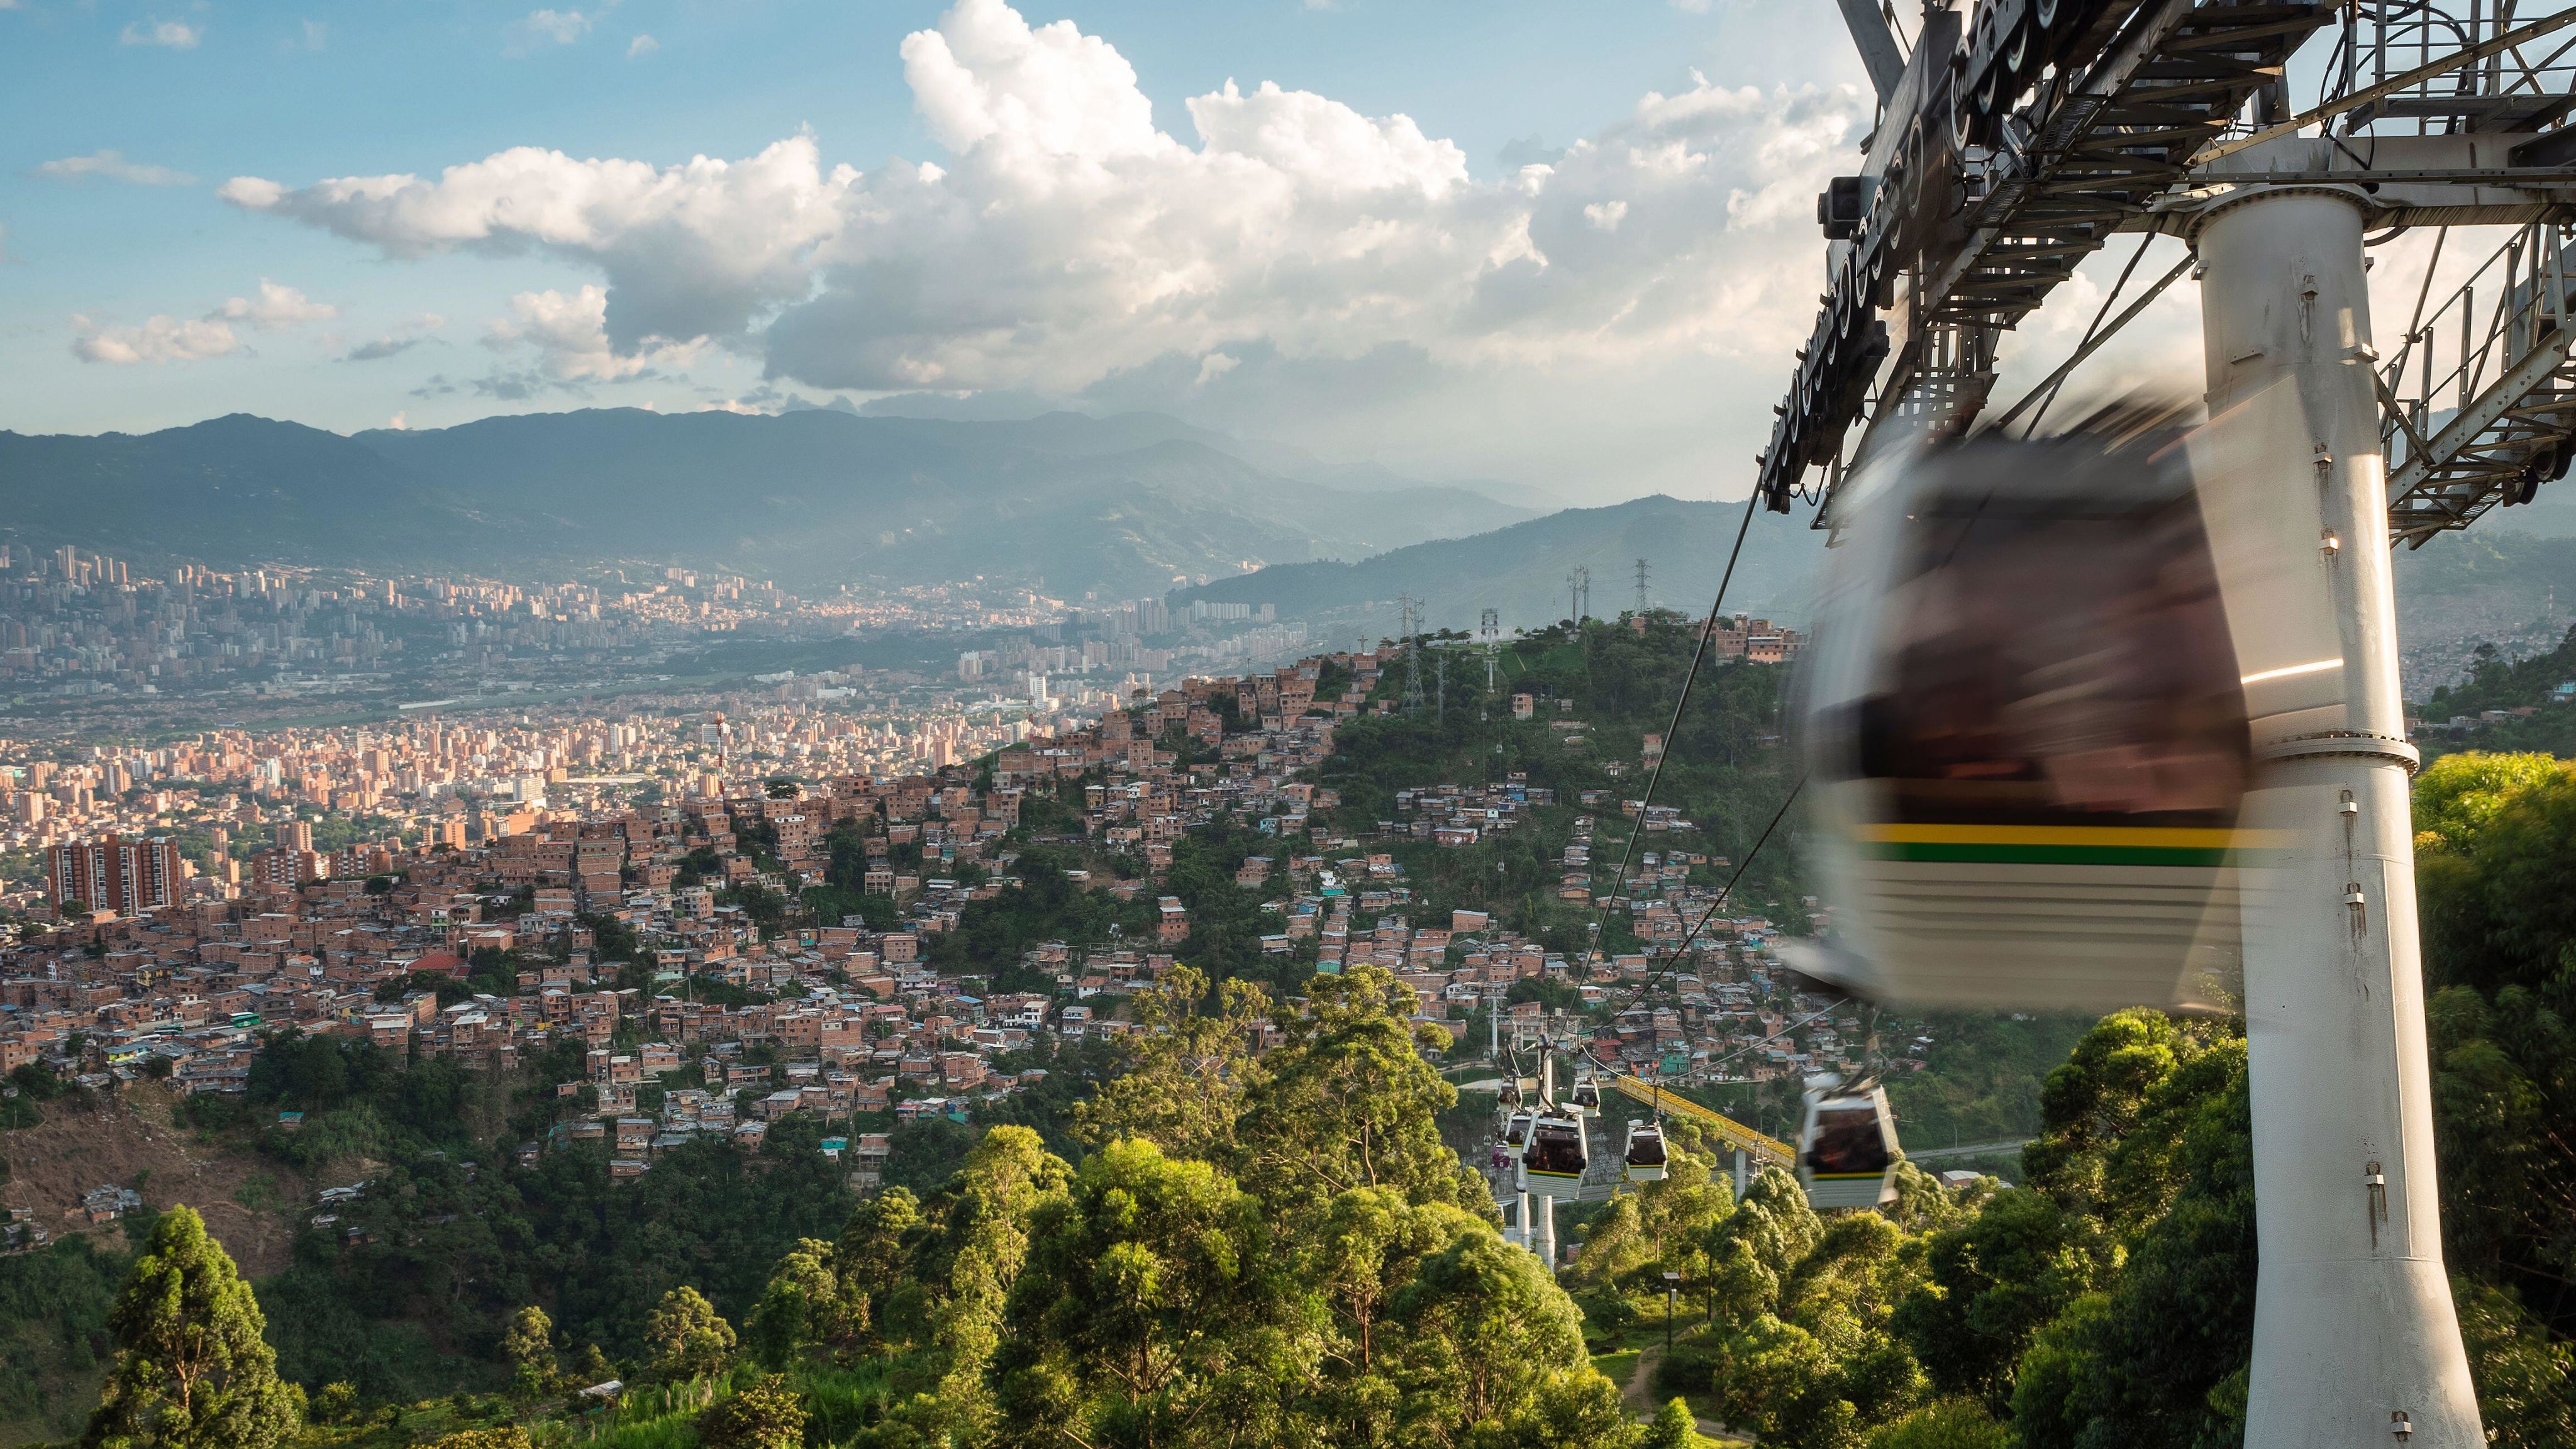 MetroCable public transit system in Medellin, Colombia